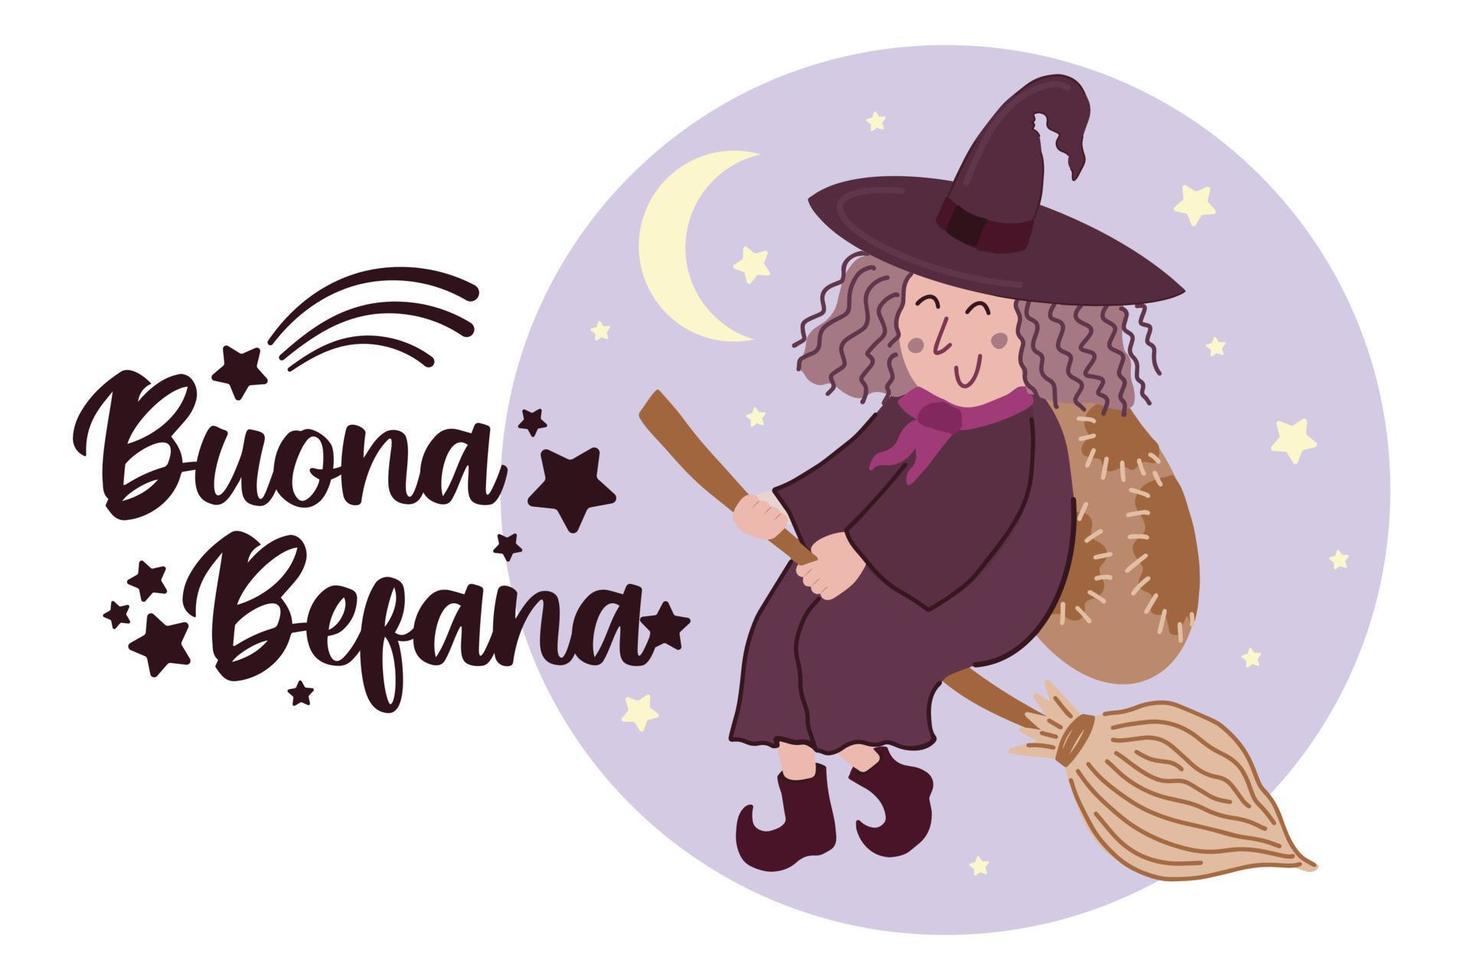 Buona Befana - Italian translation - Happy Befana - lettering decorated with stars and comet symbols. Cute Witch Befana tradition Christmas Epiphany character in Italy flying on broomstick vector